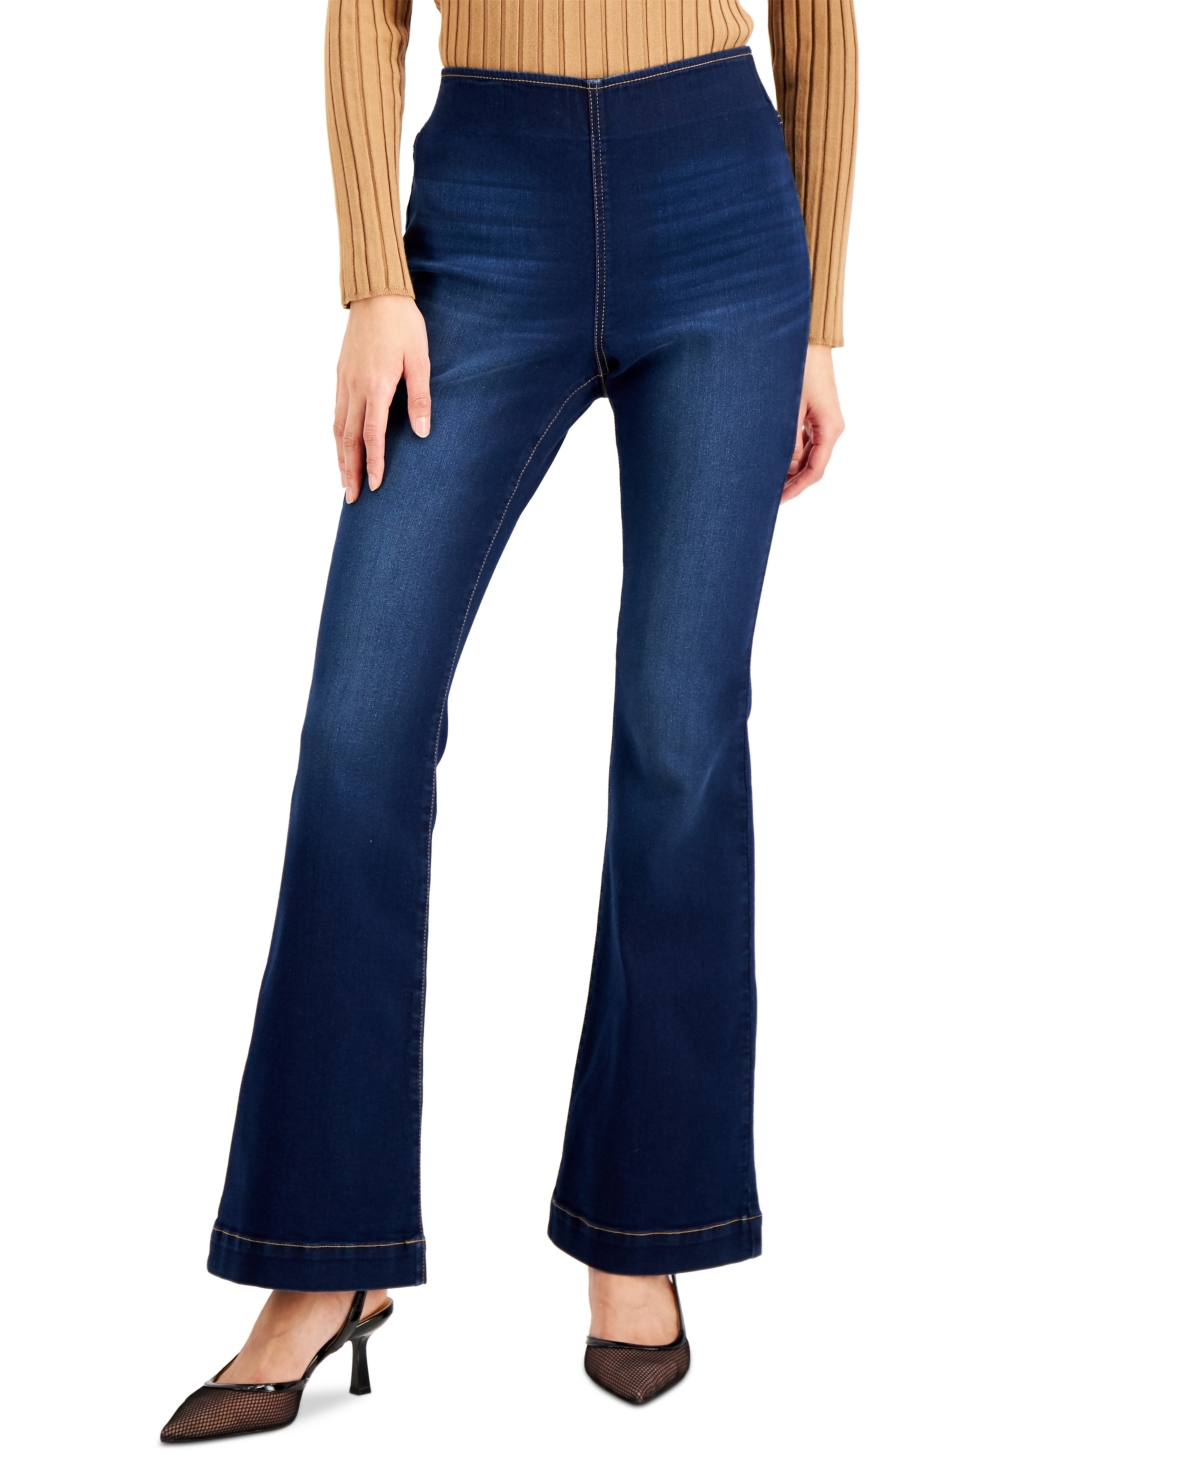 Inc International Concepts Women's High Rise Pull-On Flare Jeans